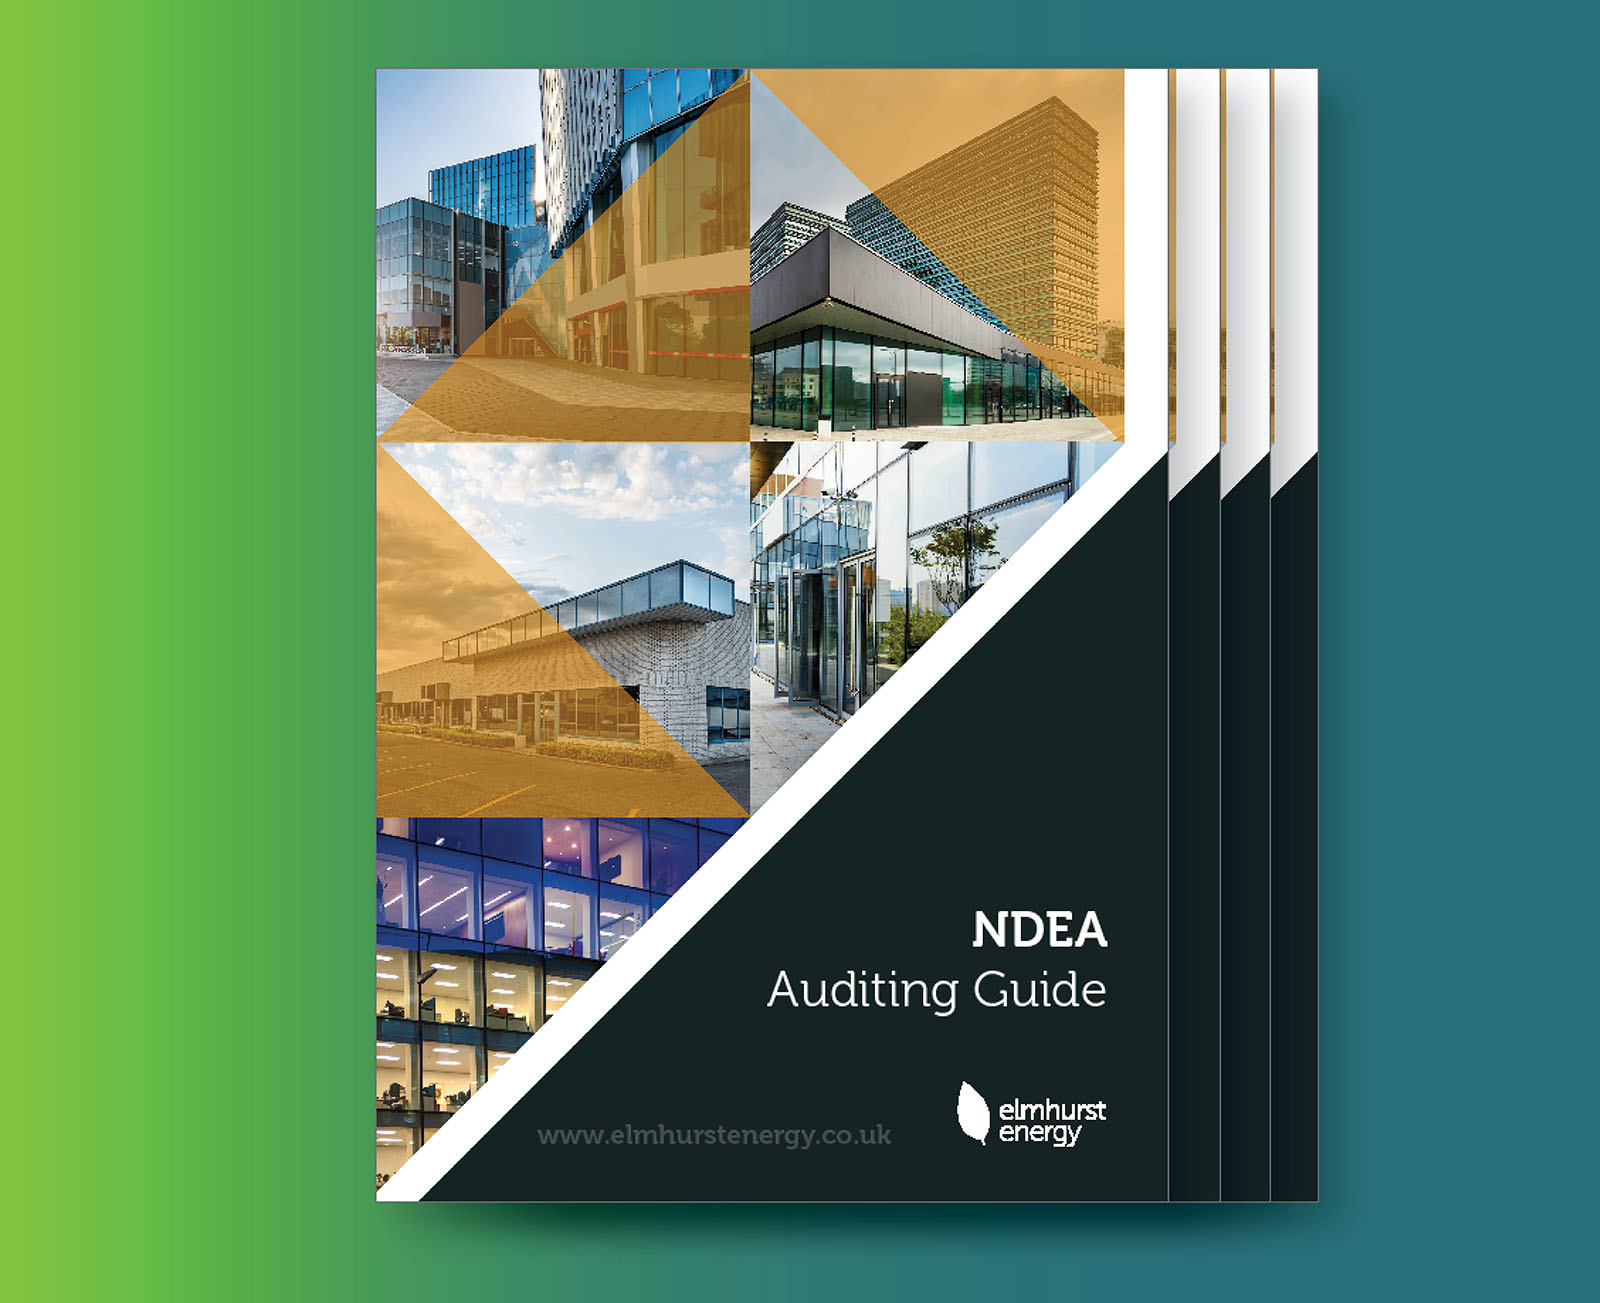 ndea-auditing-guide